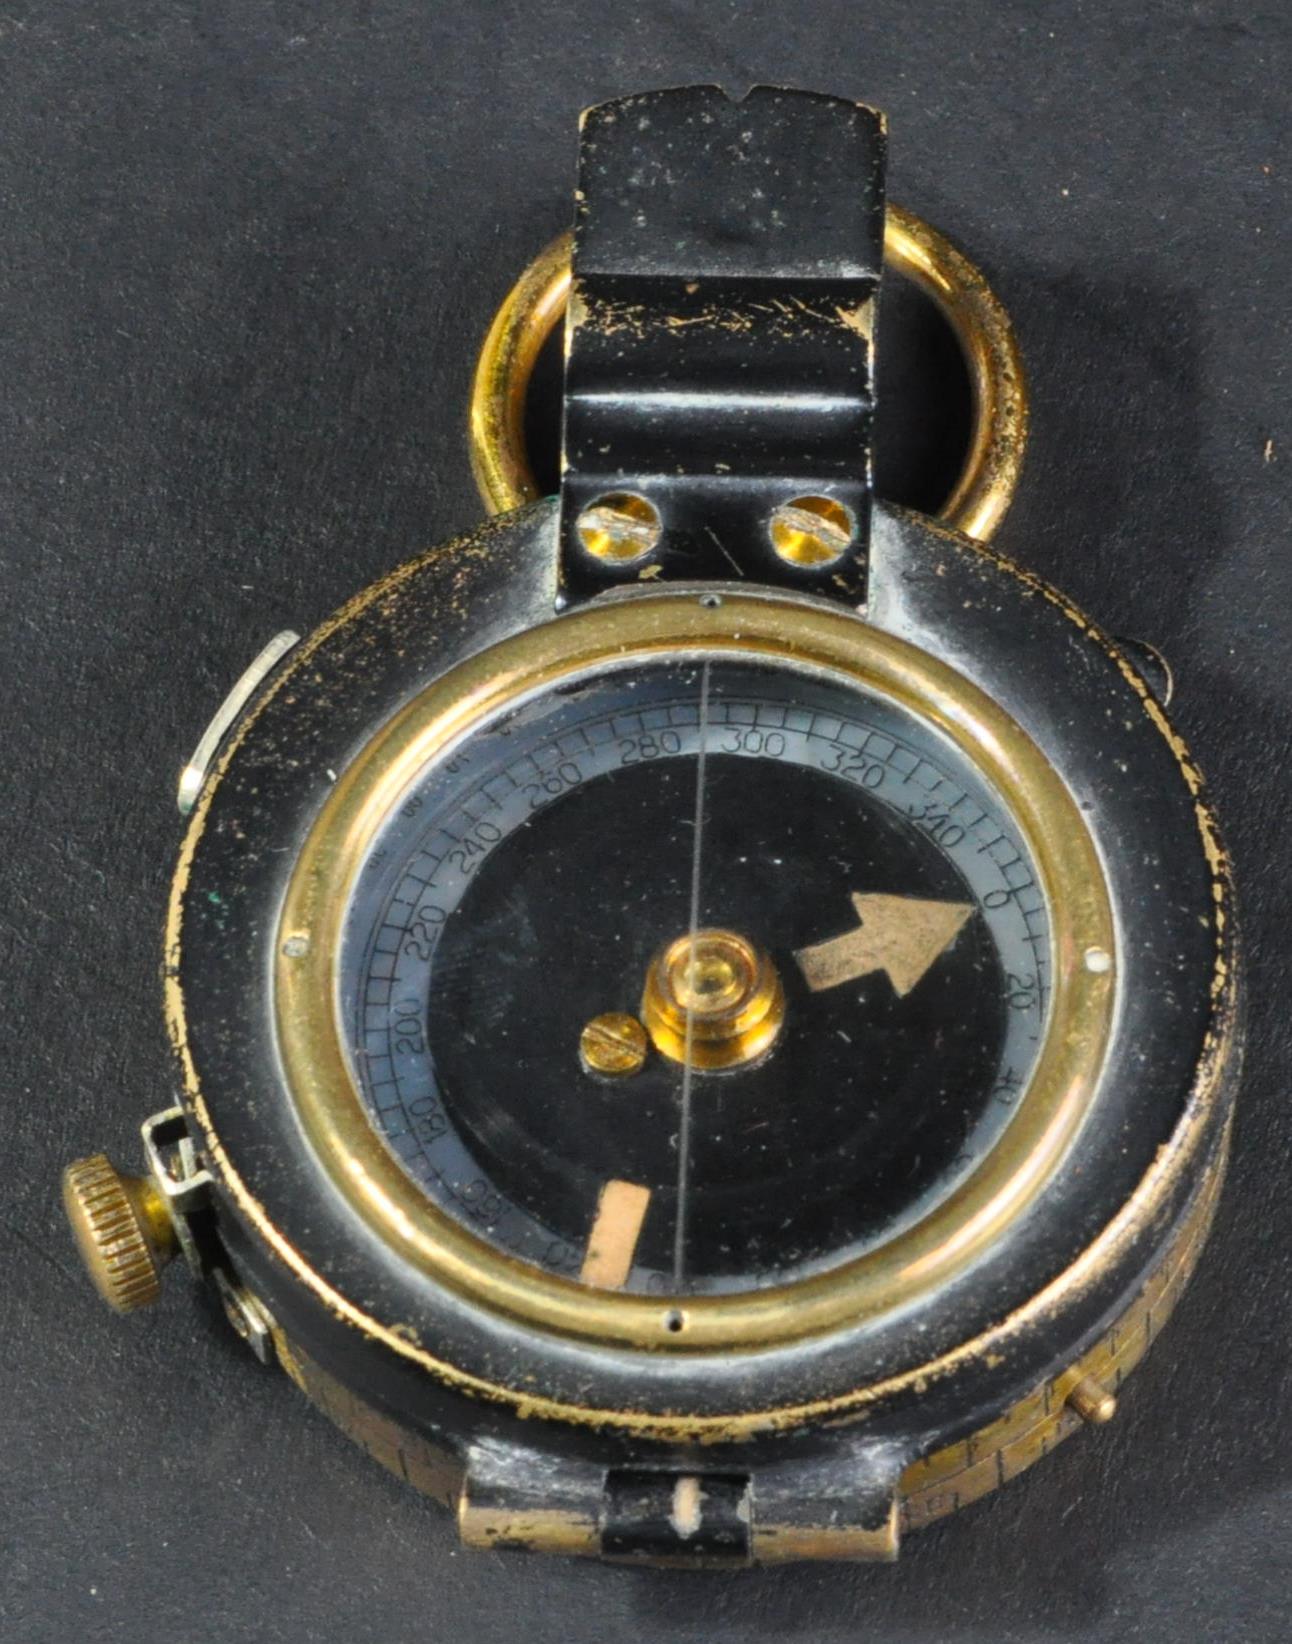 WWII SECOND WORLD WAR AUSTRALIAN ARMY ISSUED FIELD COMPASS - Image 2 of 4